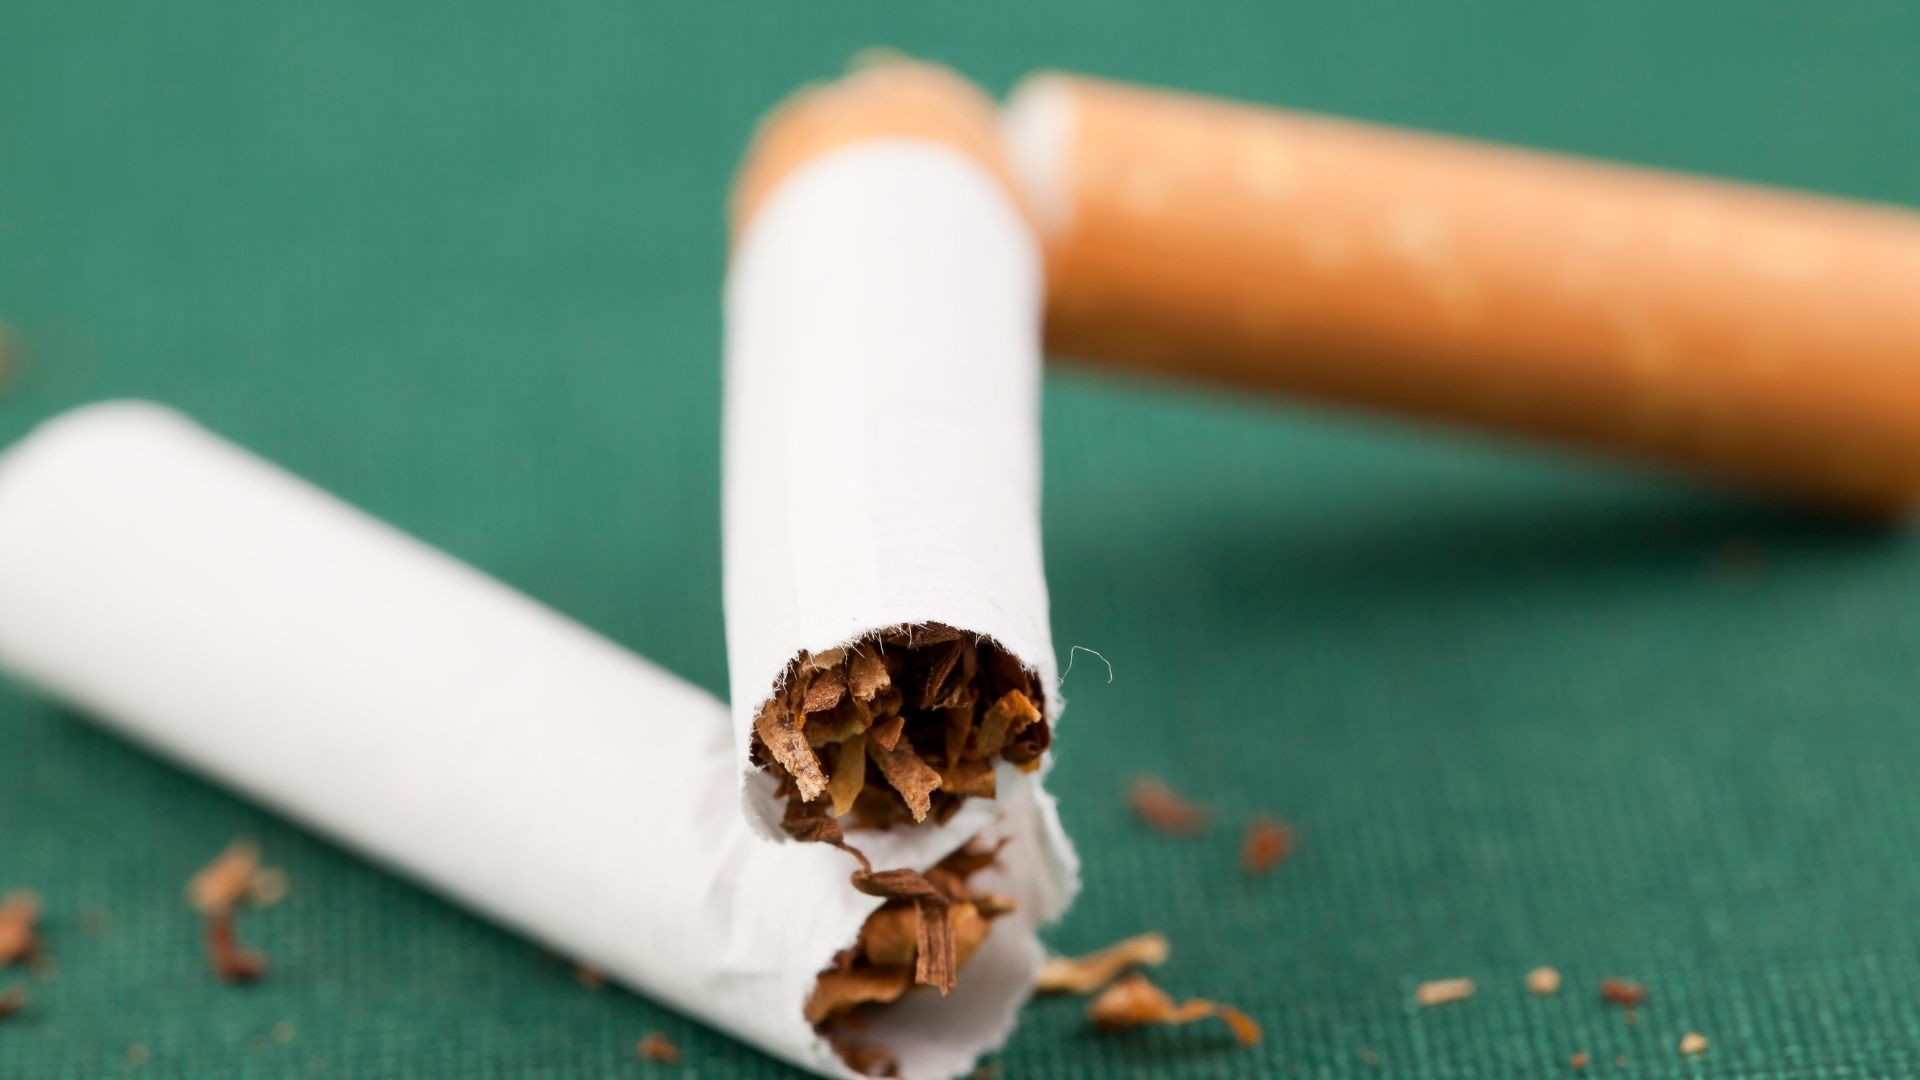 Smoking Cessation Programs in the Workplace